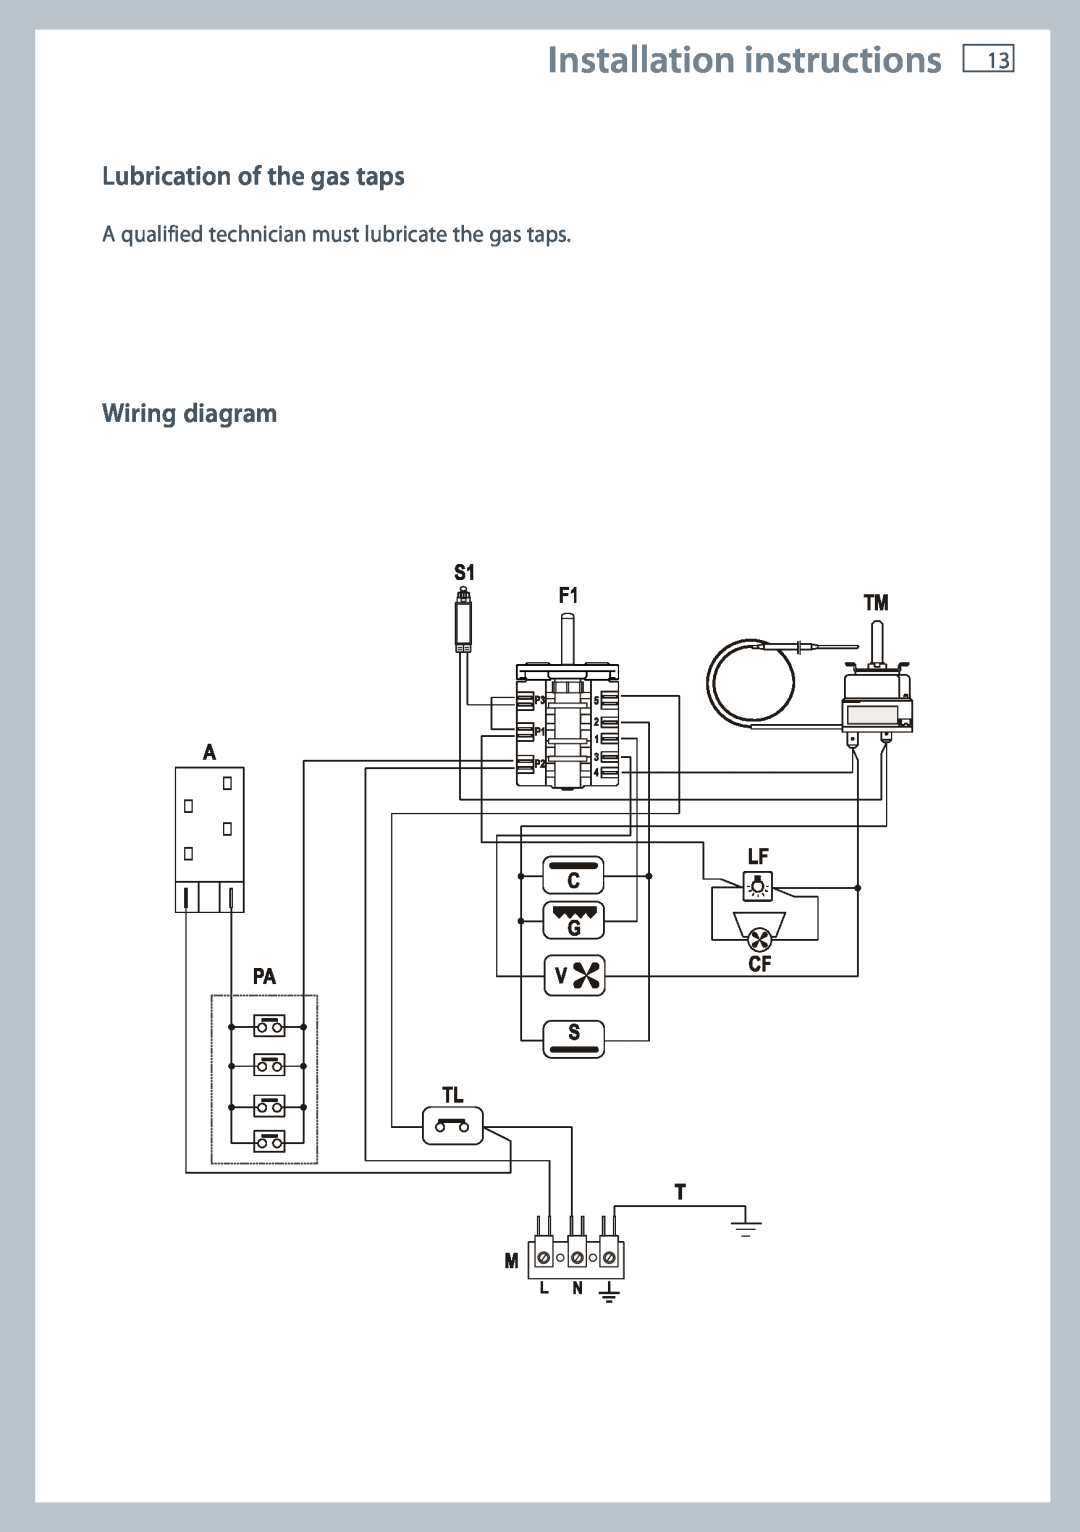 Fisher & Paykel OR60 installation instructions Lubrication of the gas taps, Wiring diagram, Installation instructions 